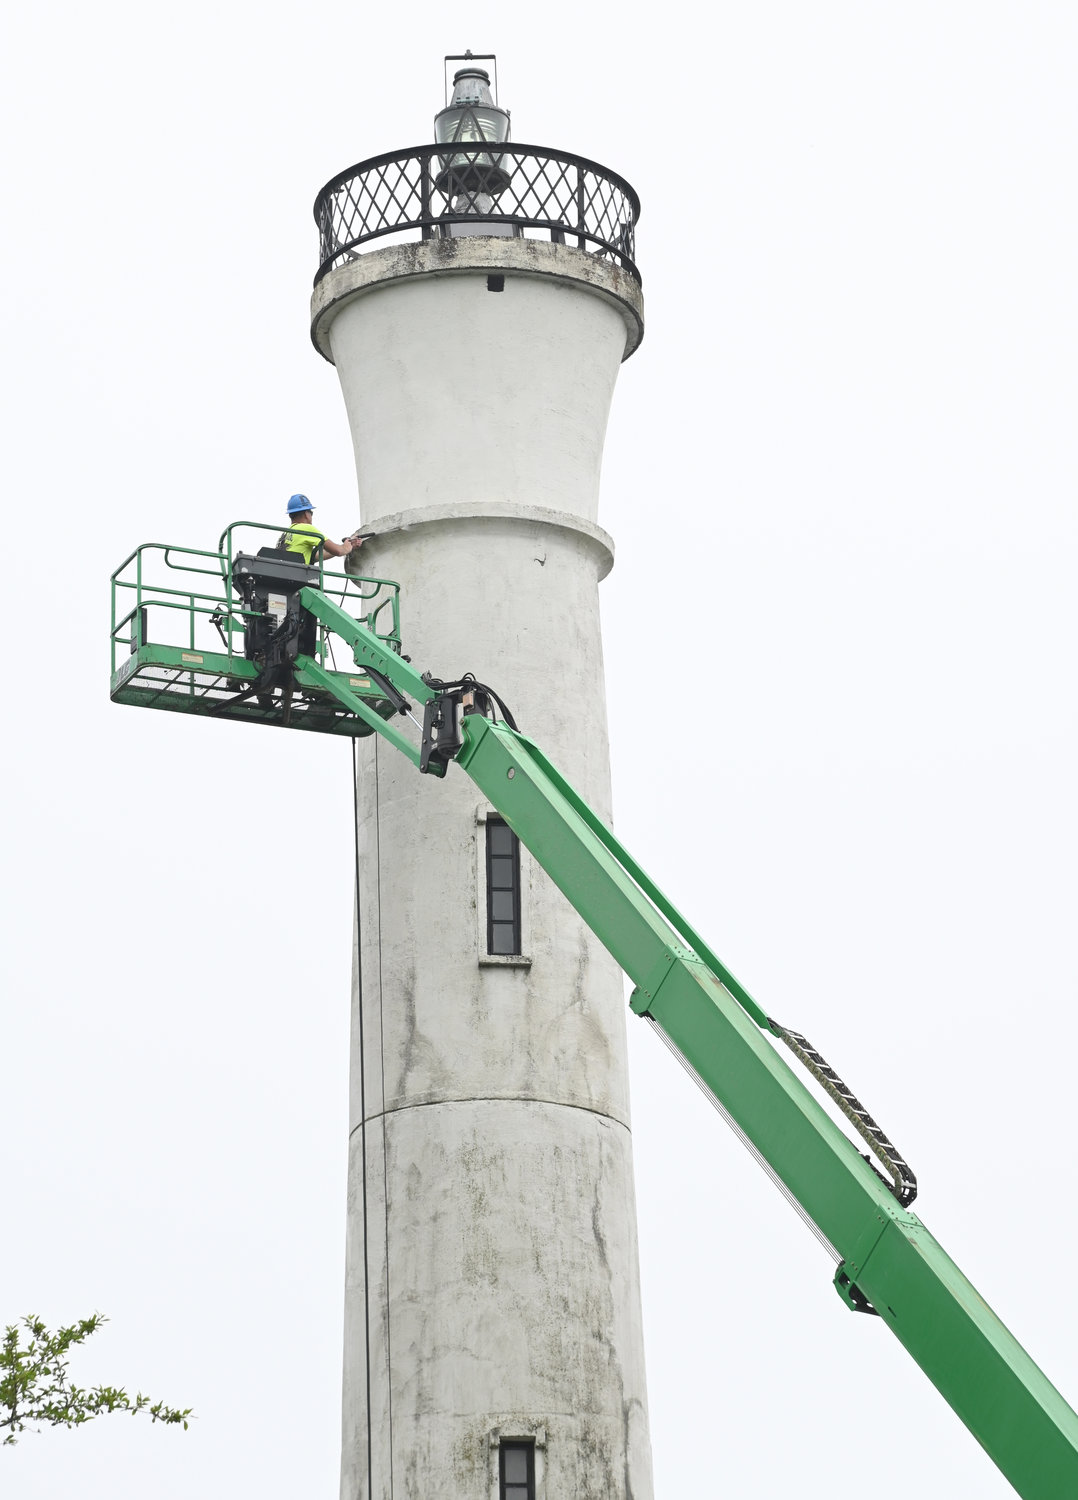 LIGHTHOUSE CLEANING — New York Power Authority crews pressure wash the Verona Beach Lighthouse Wednesday afternoon as they prepare for the installation of LED lights as part of the Iconic Lighting Project.